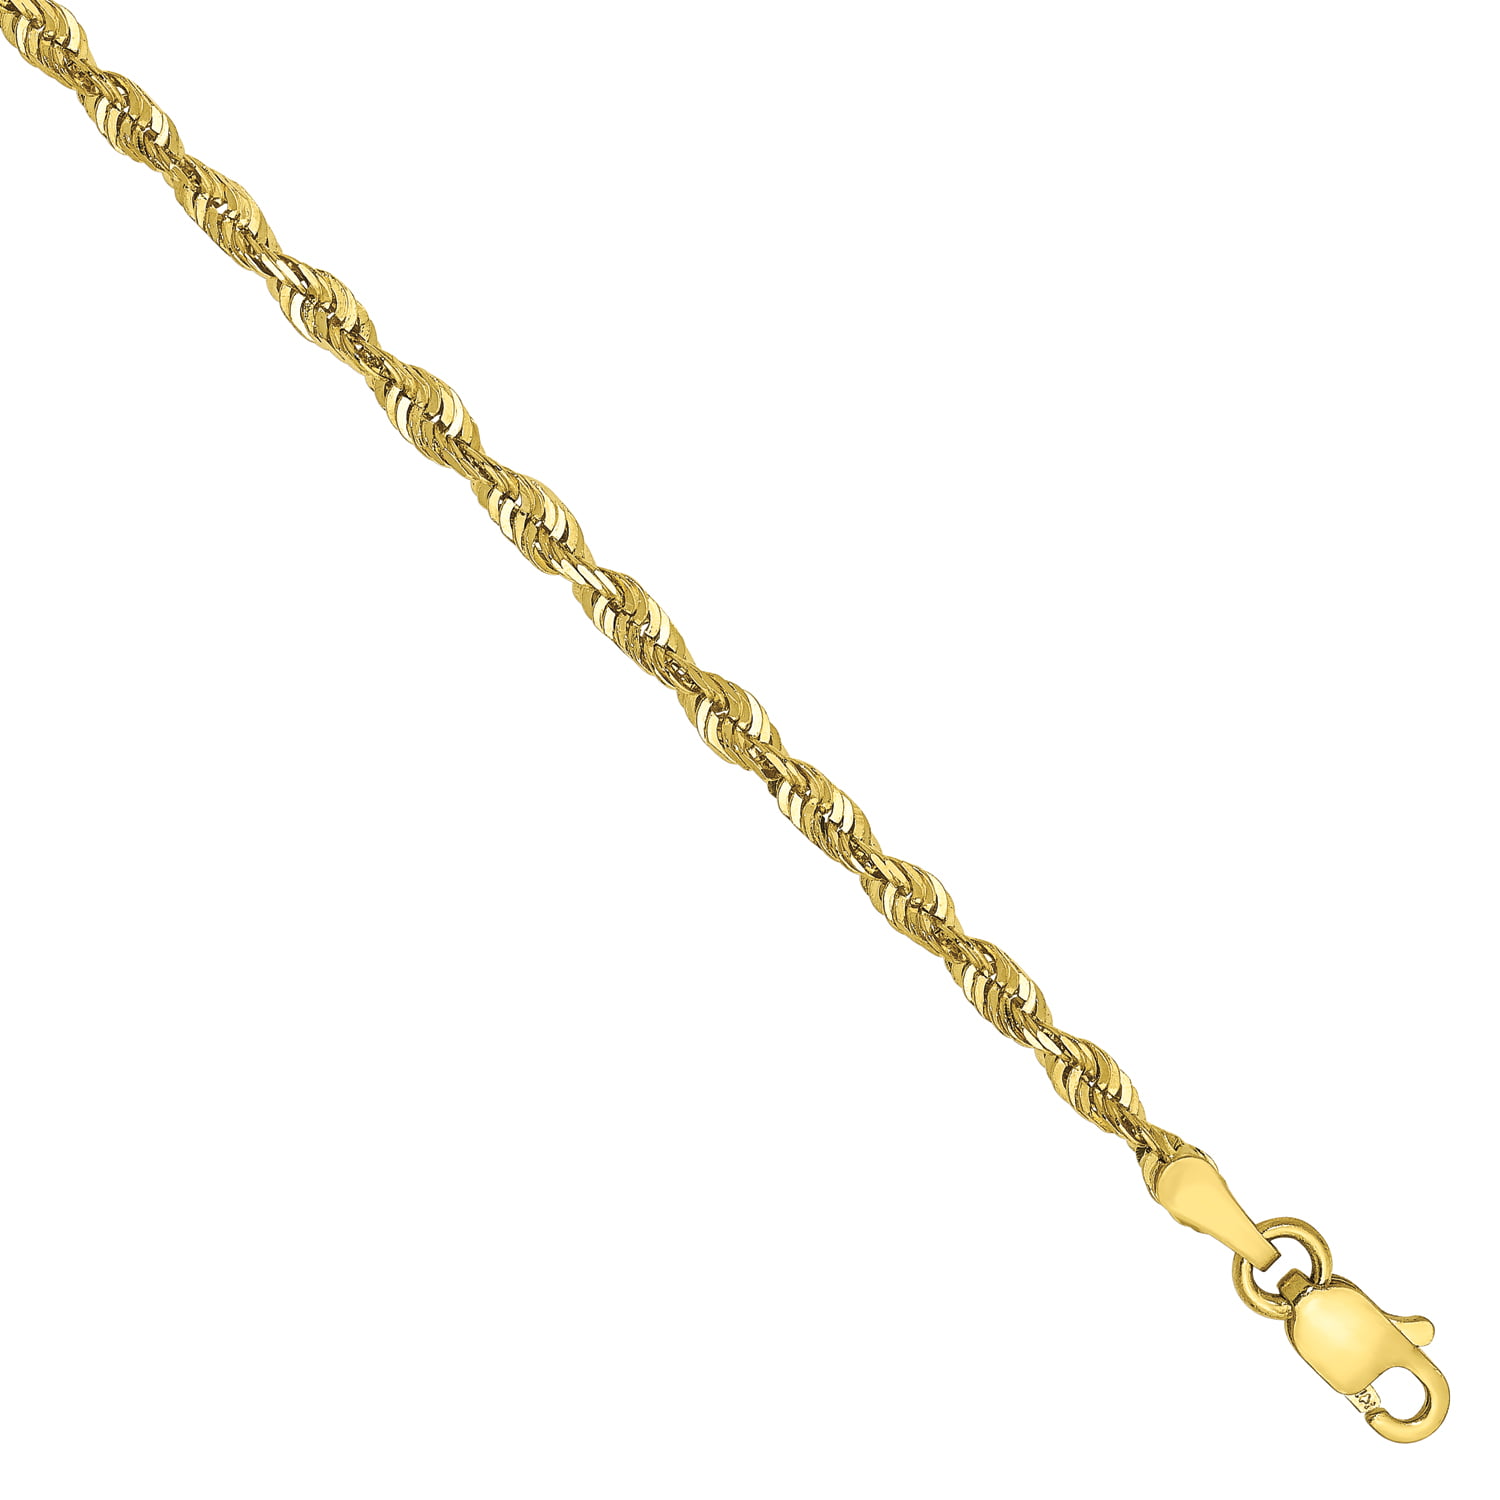 F.Hinds 9ct Gold 1mm Wide Curb Chain 16" inch Necklace Jewelry Gift Unisex 